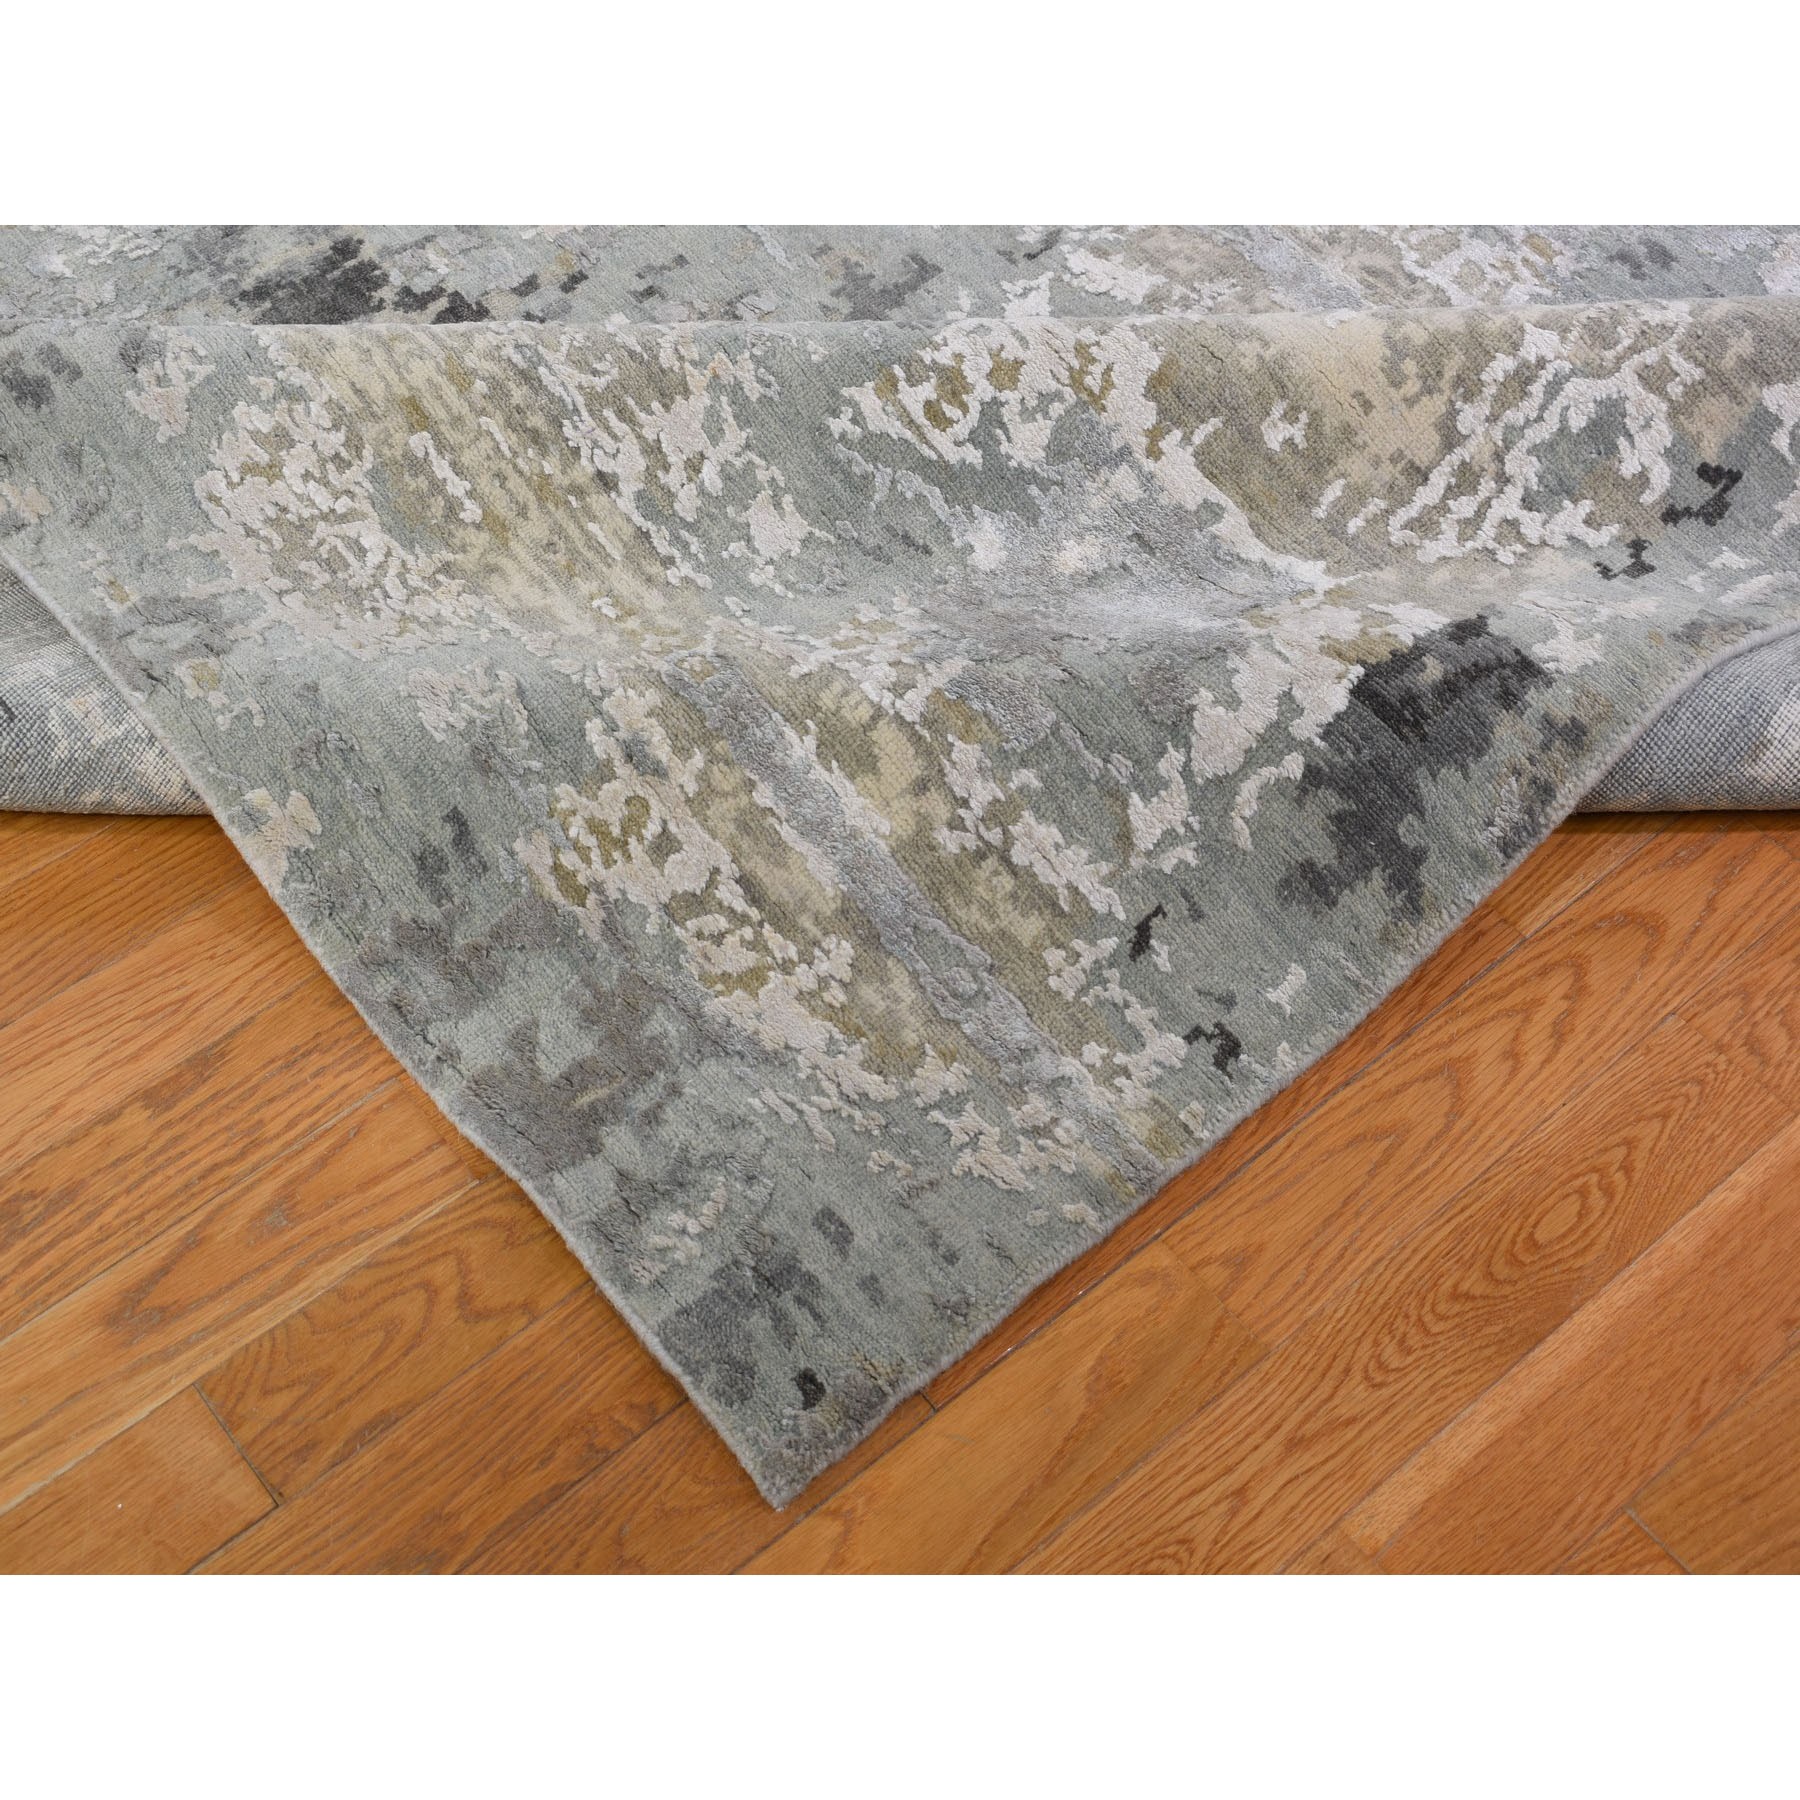 11-10 x14-10   Oversized Silver Abstract Design Hi-Lo Pile Wool And Silk Hand Knotted Oriental Rug 